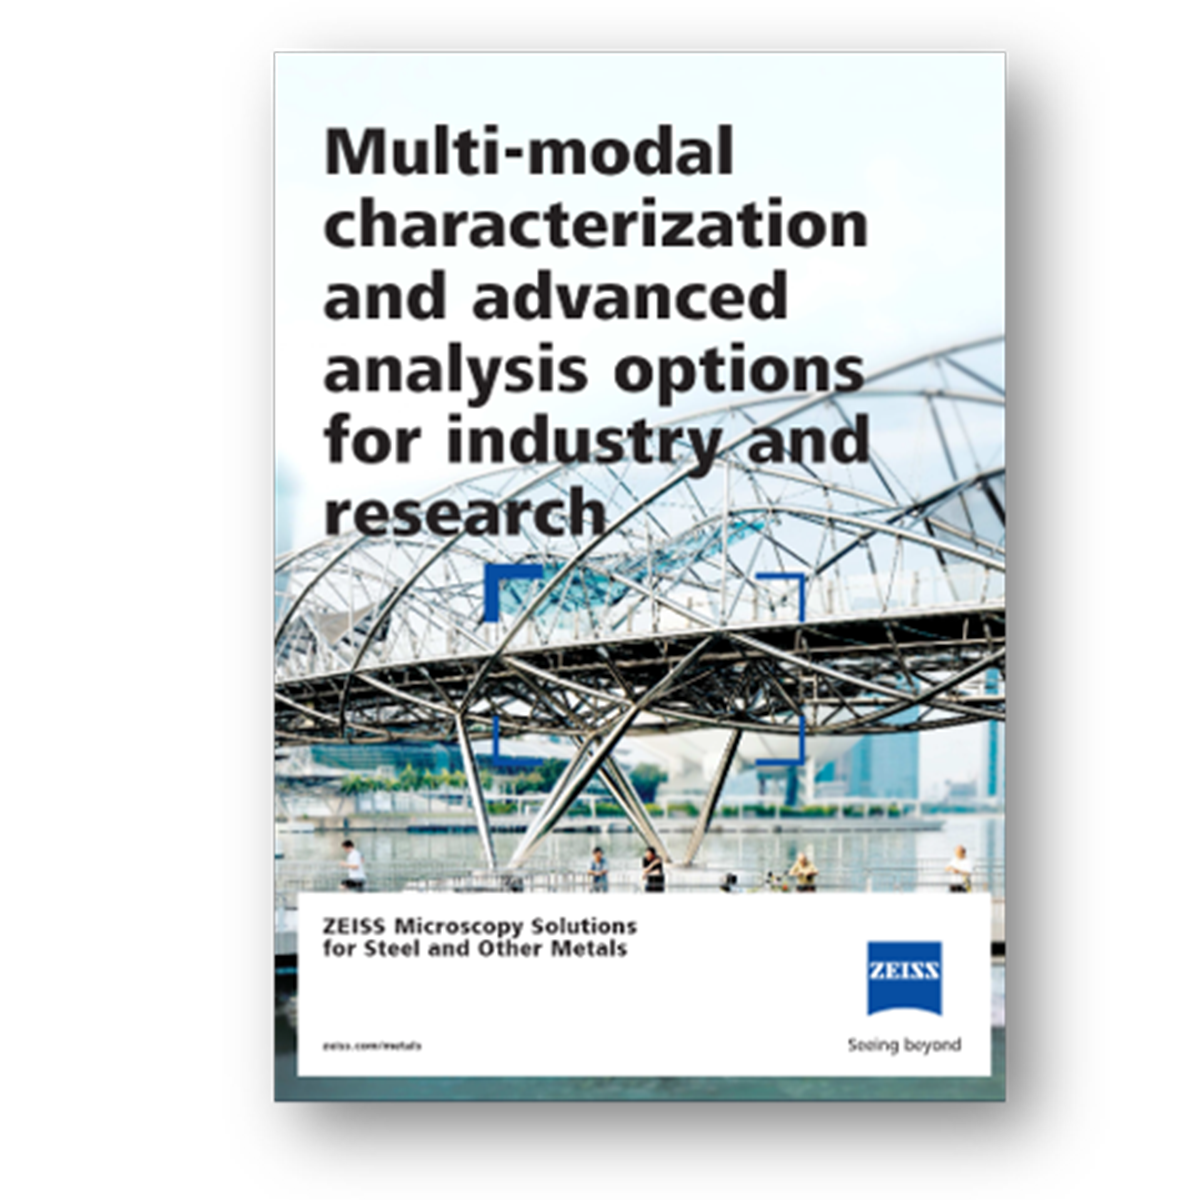 Multi-modal characterization and advanced analysis options for industry and research